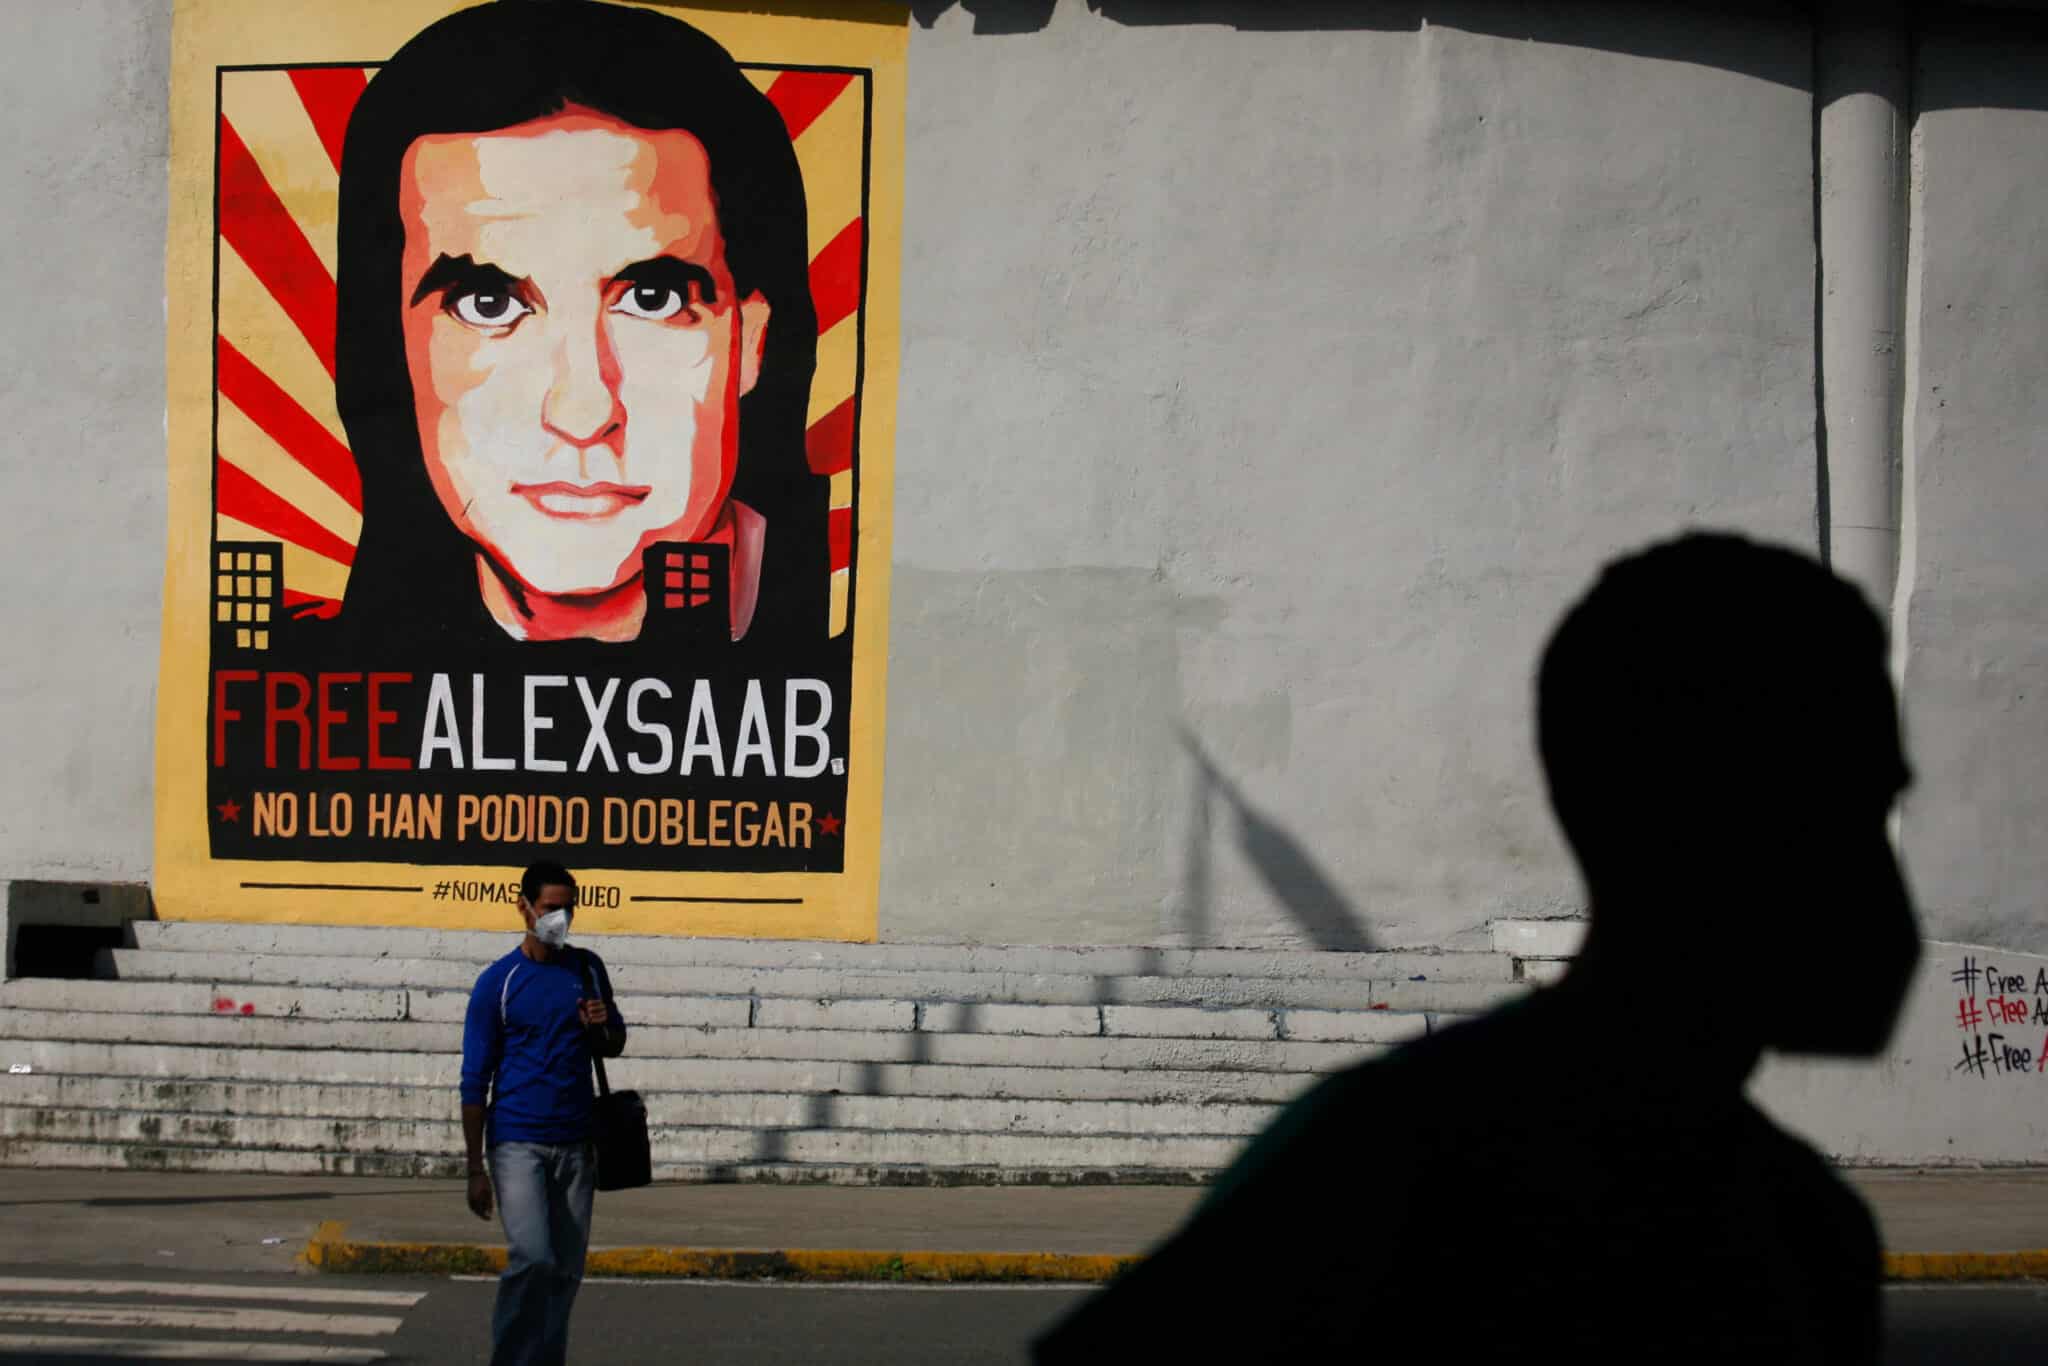 People walk past graffiti in favor of the release of Colombian businessman Alex Saab, amidst the Coronavirus pandemic, on the west side of the city in Caracas, Venezuela on September 8, 2021. Photo: Javier Campos/NurPhoto via Getty Images.